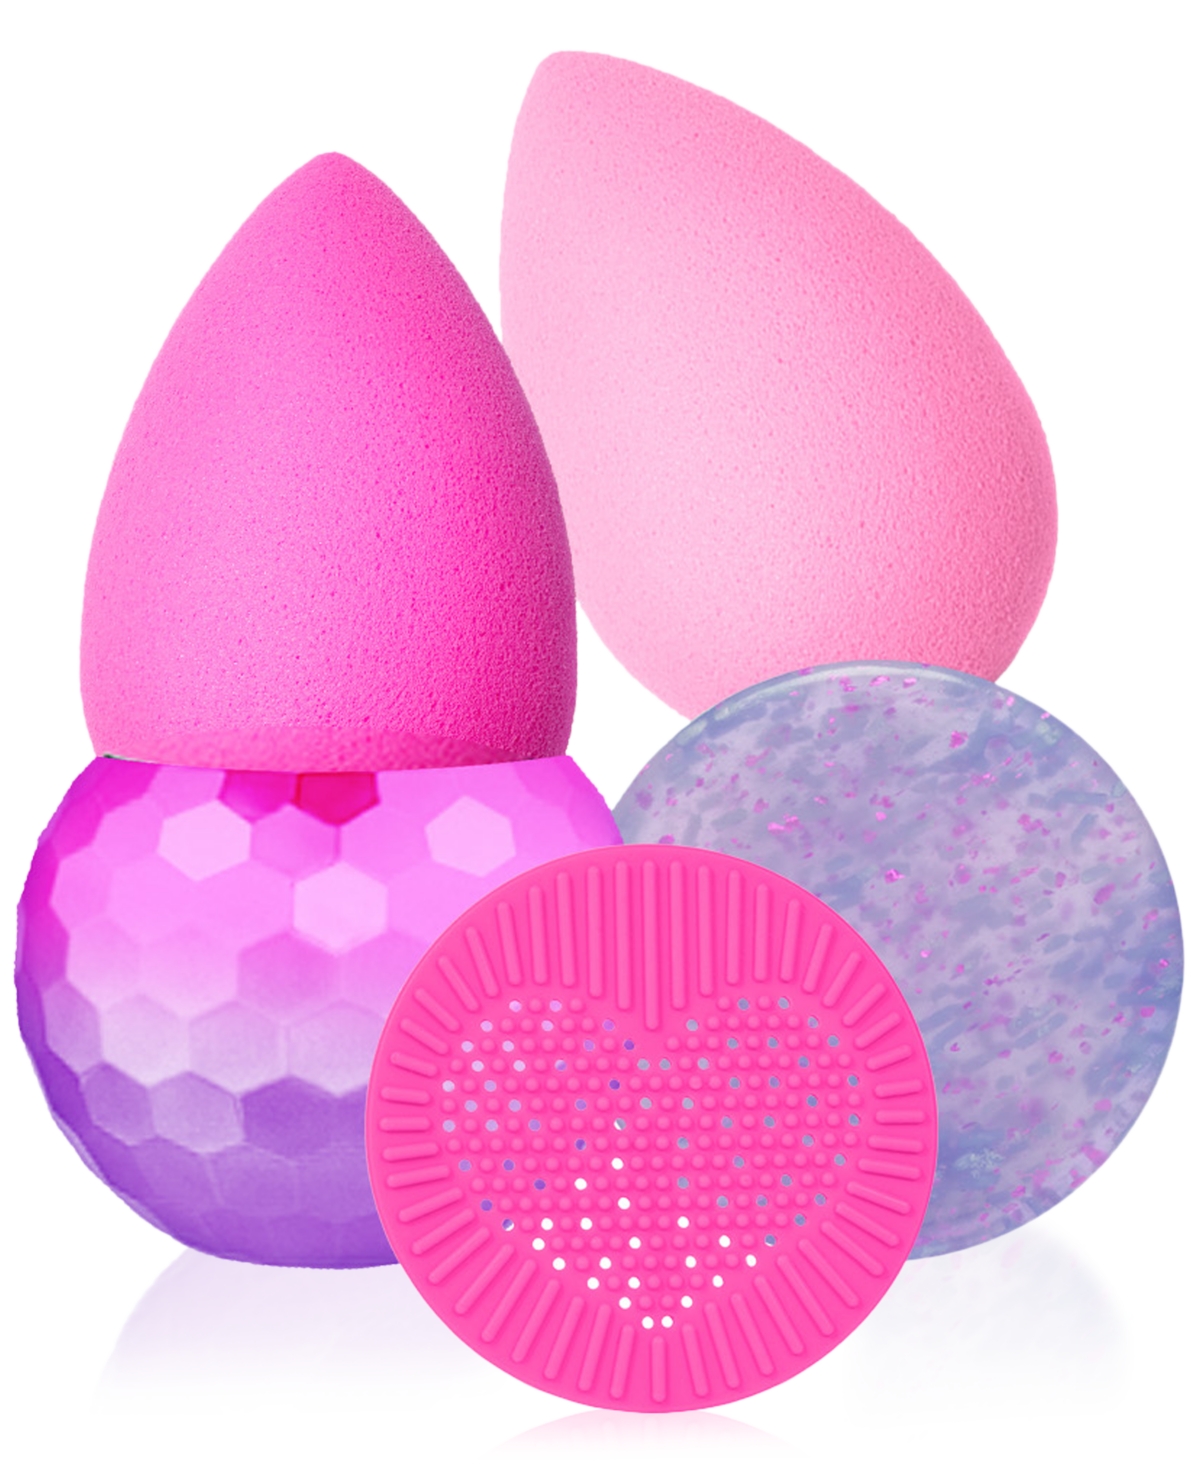 Beautyblender 5-pc. Disc-glow Inferno Essentials Set In Original Pink And Bubble